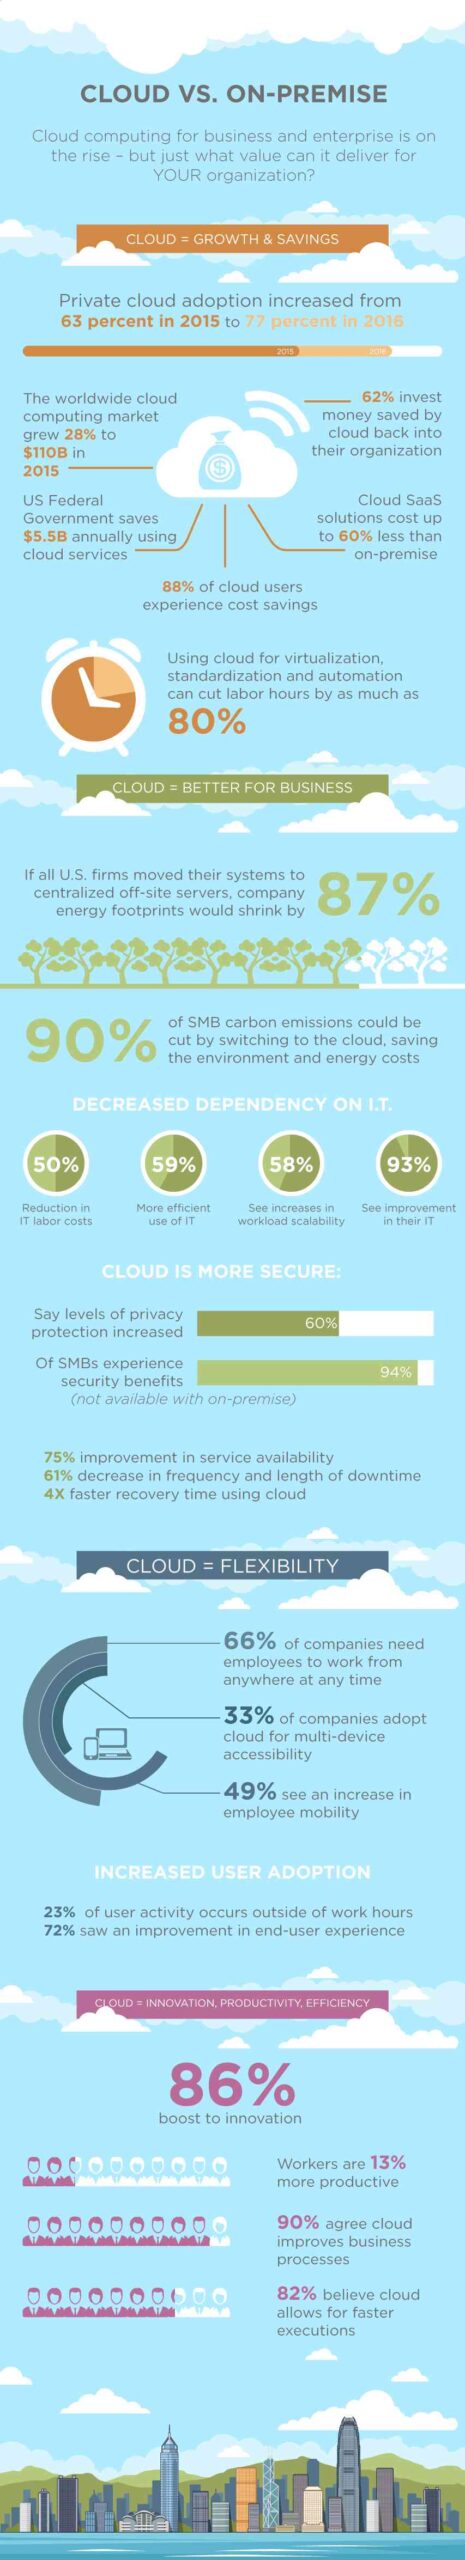 cloud intranet infographic